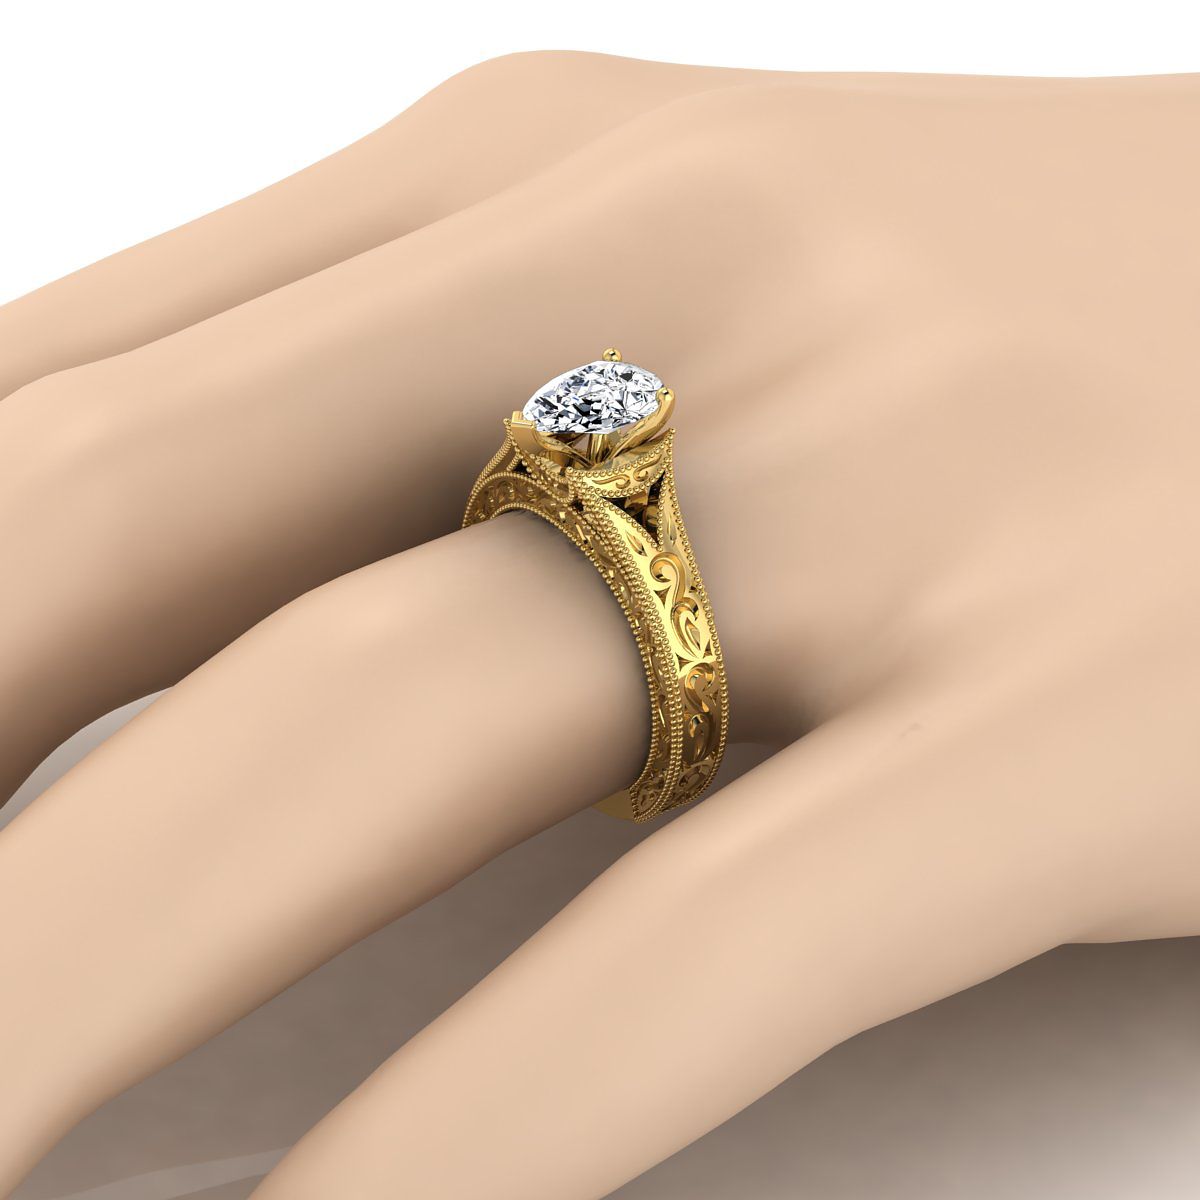 14K Yellow Gold Pear Shape Center  Hand Engraved and Milgrain Vintage Solitaire Engagement Ring